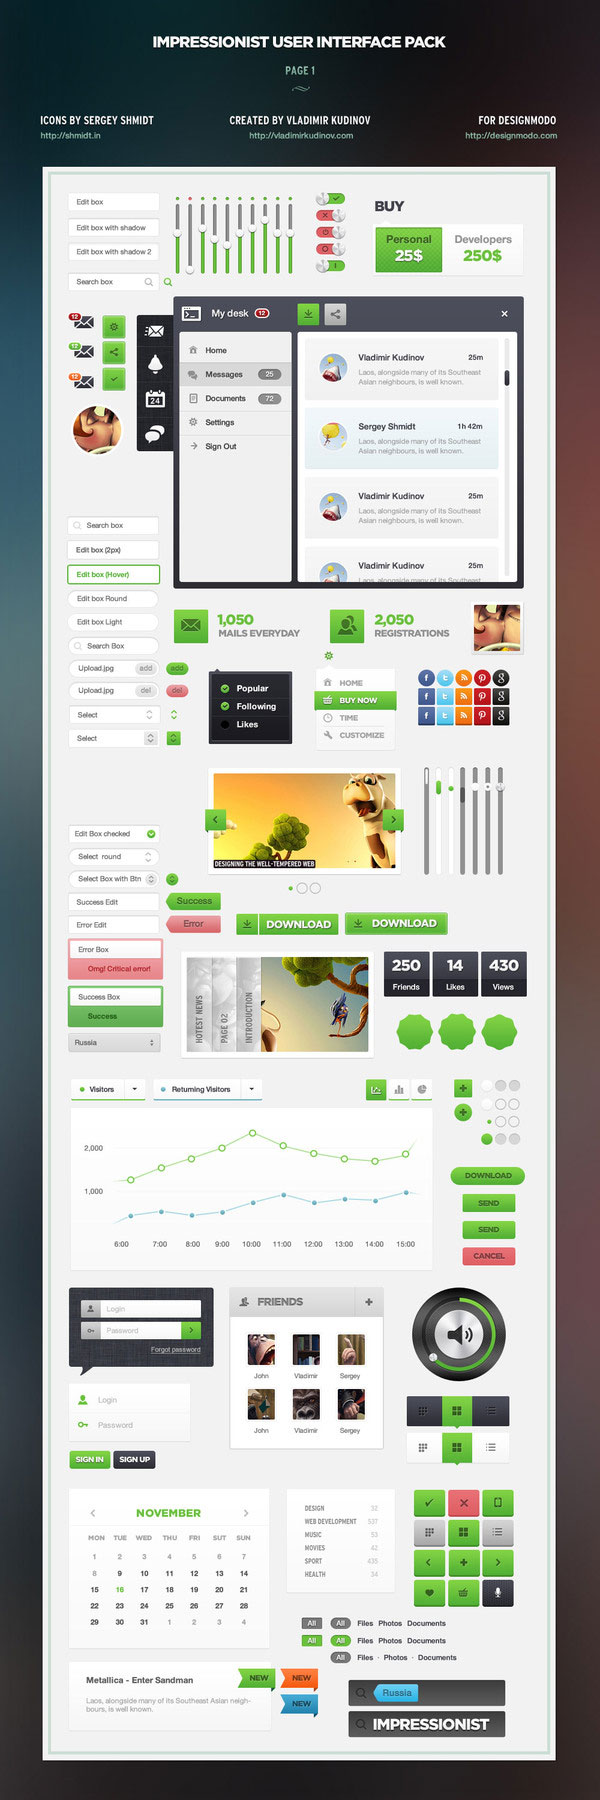 Impressionist User Interface Pack Page 1